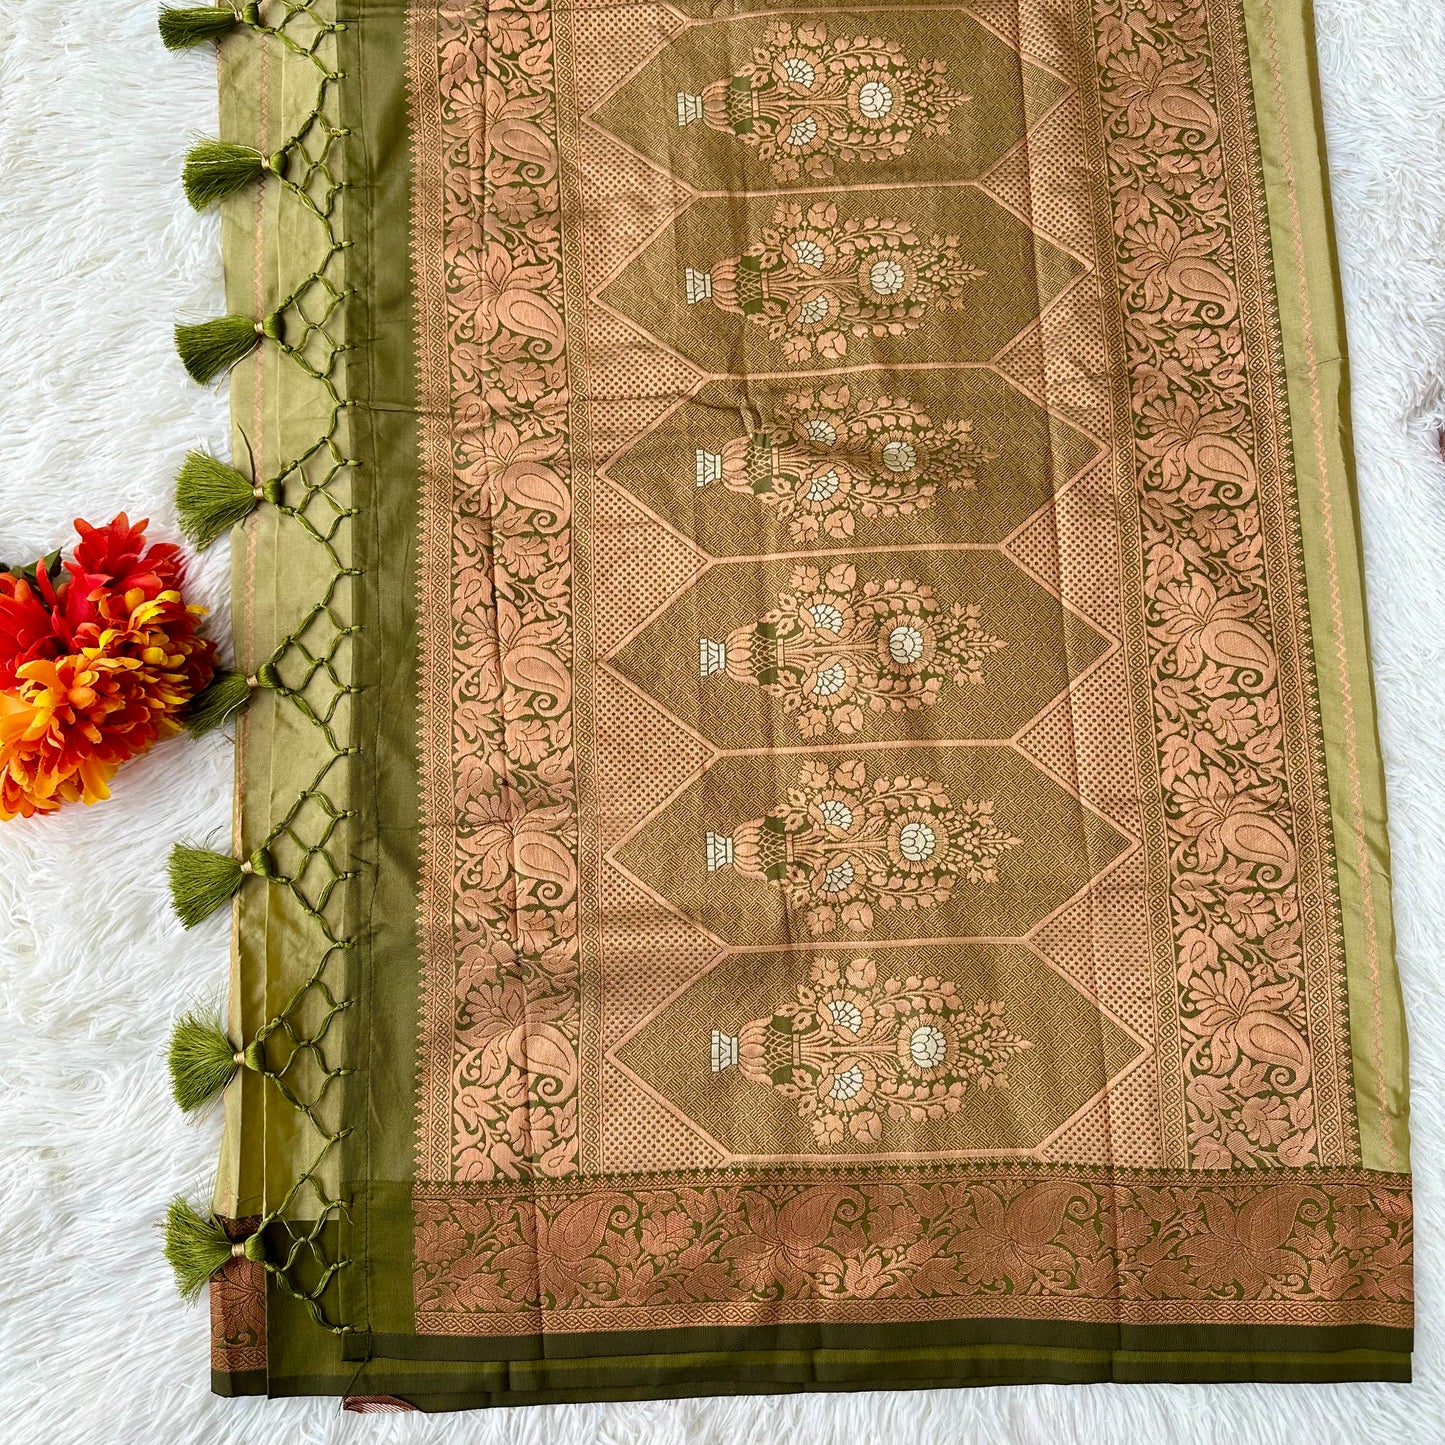 The Natural Beauty Olive Green Color Saree With The Rich Copper Zari border